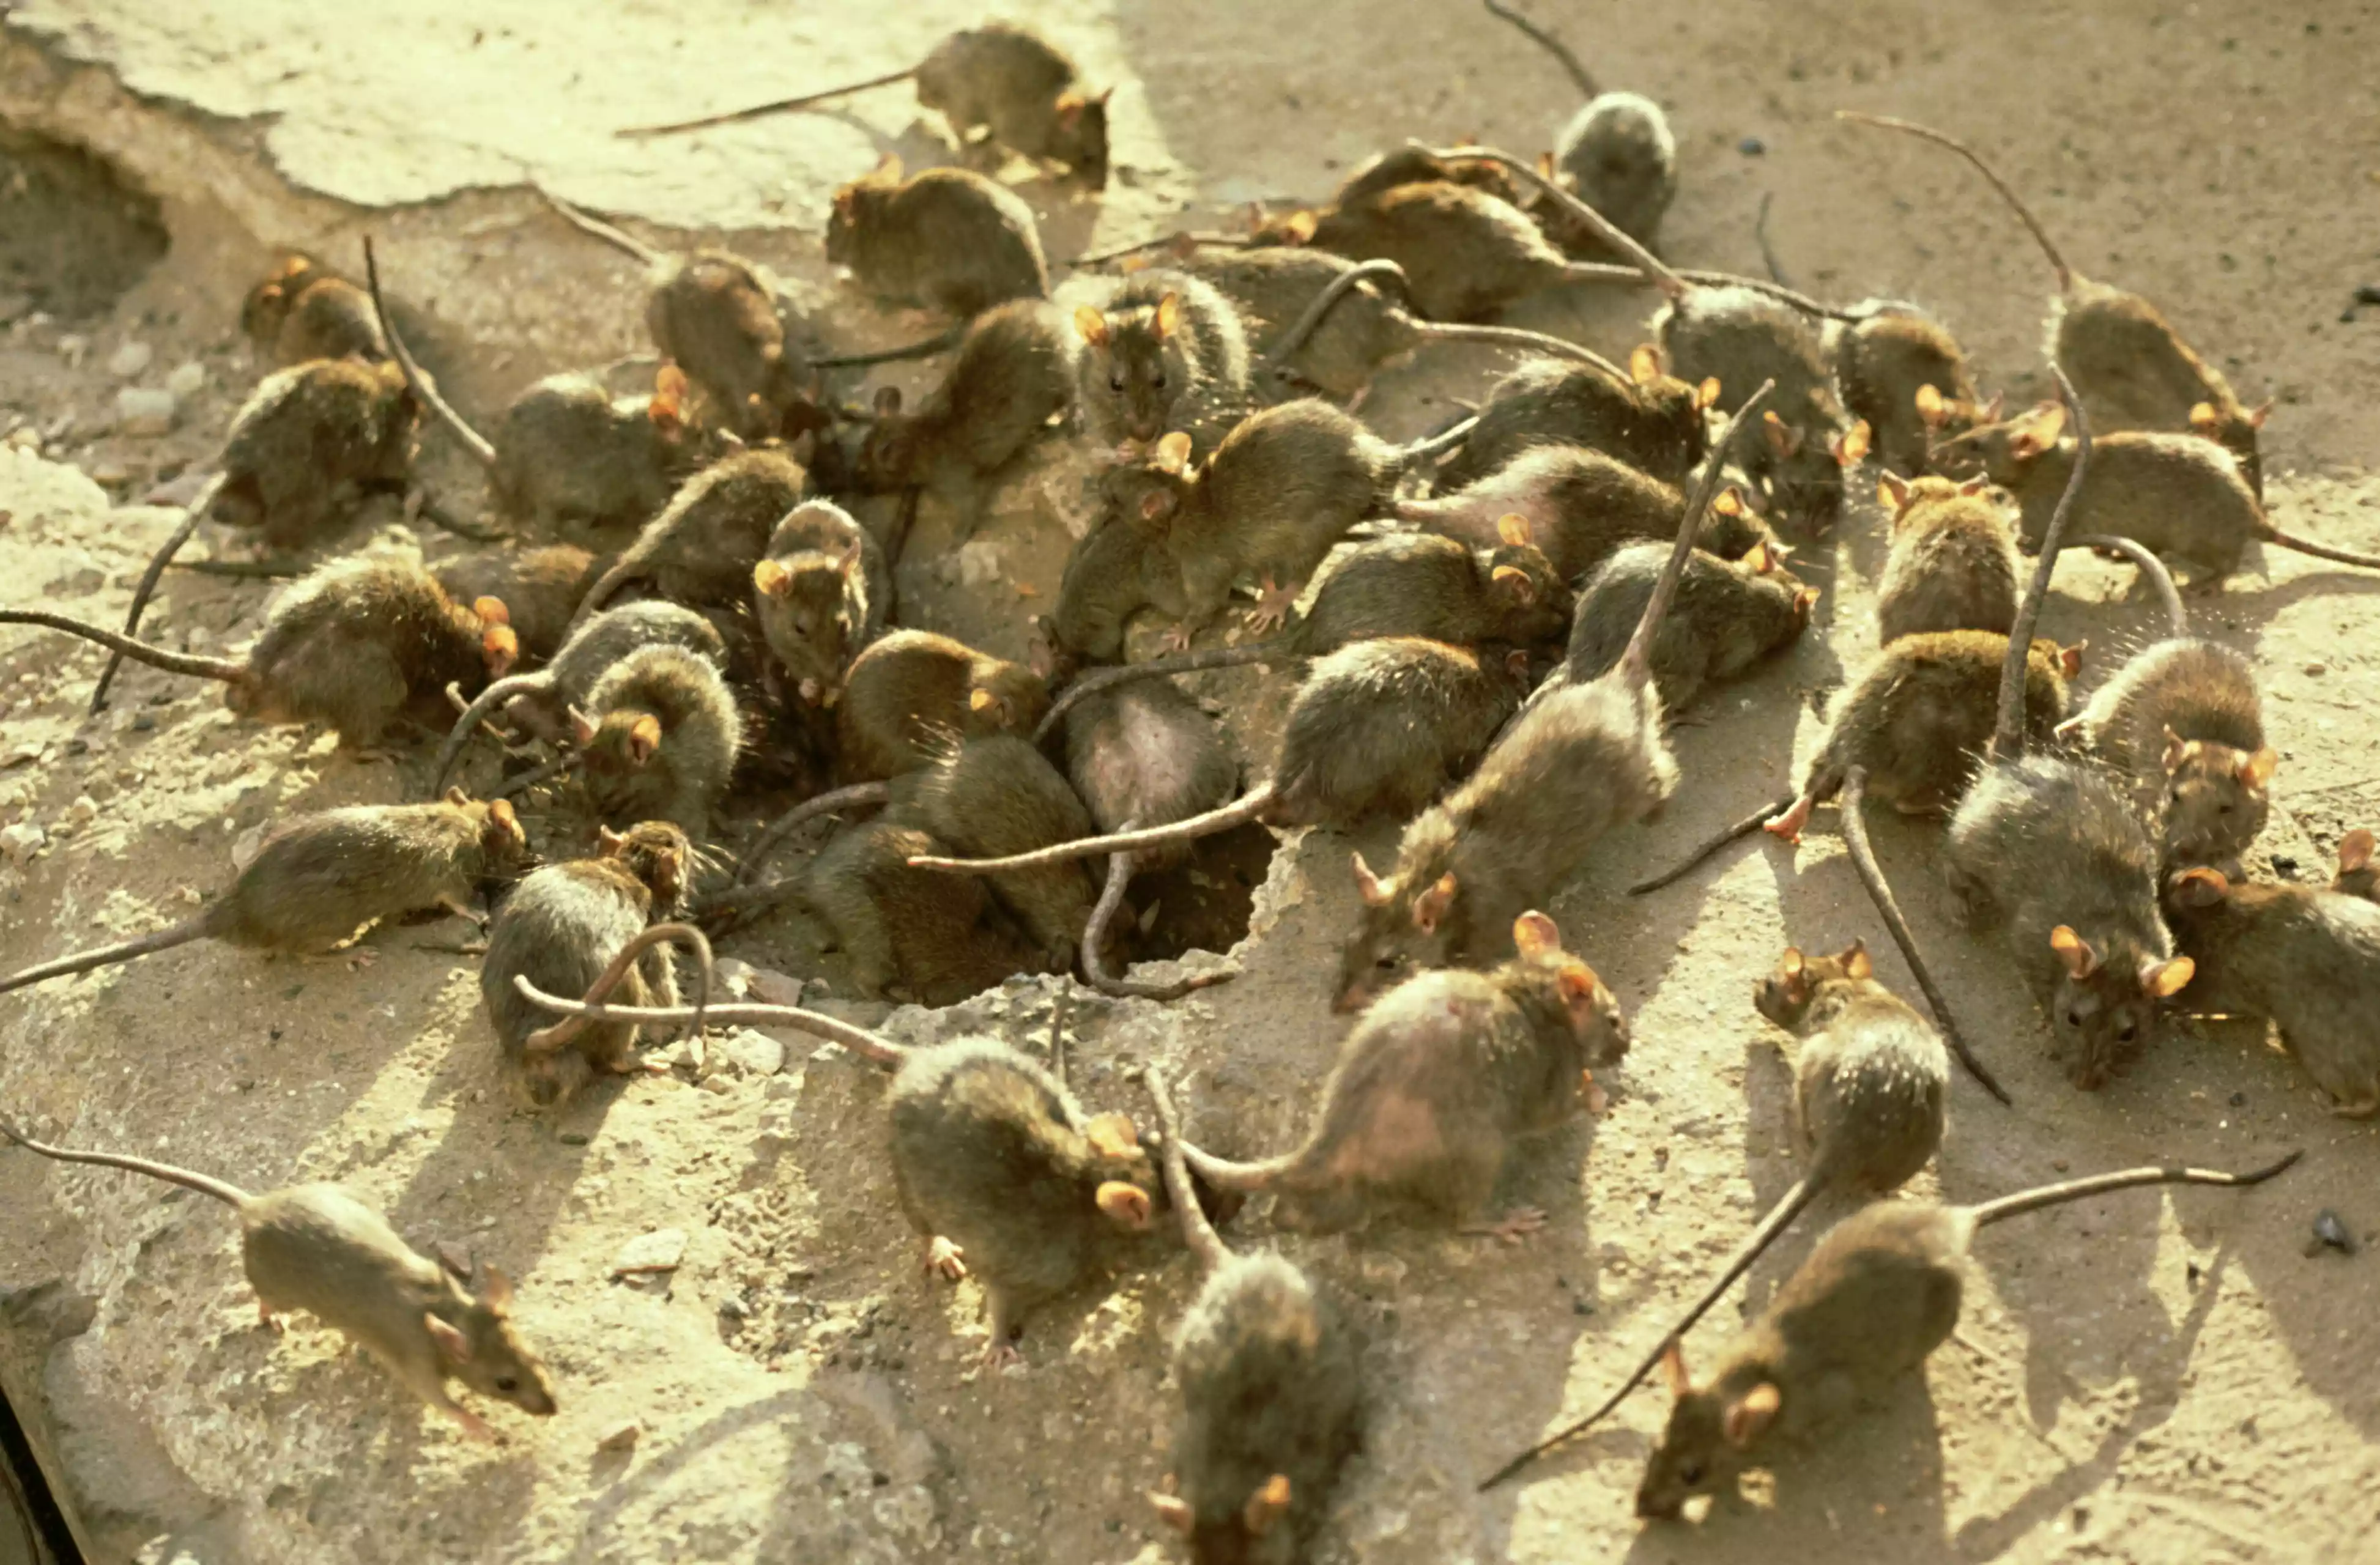 large group of grey rats on ground stripped of vegetation